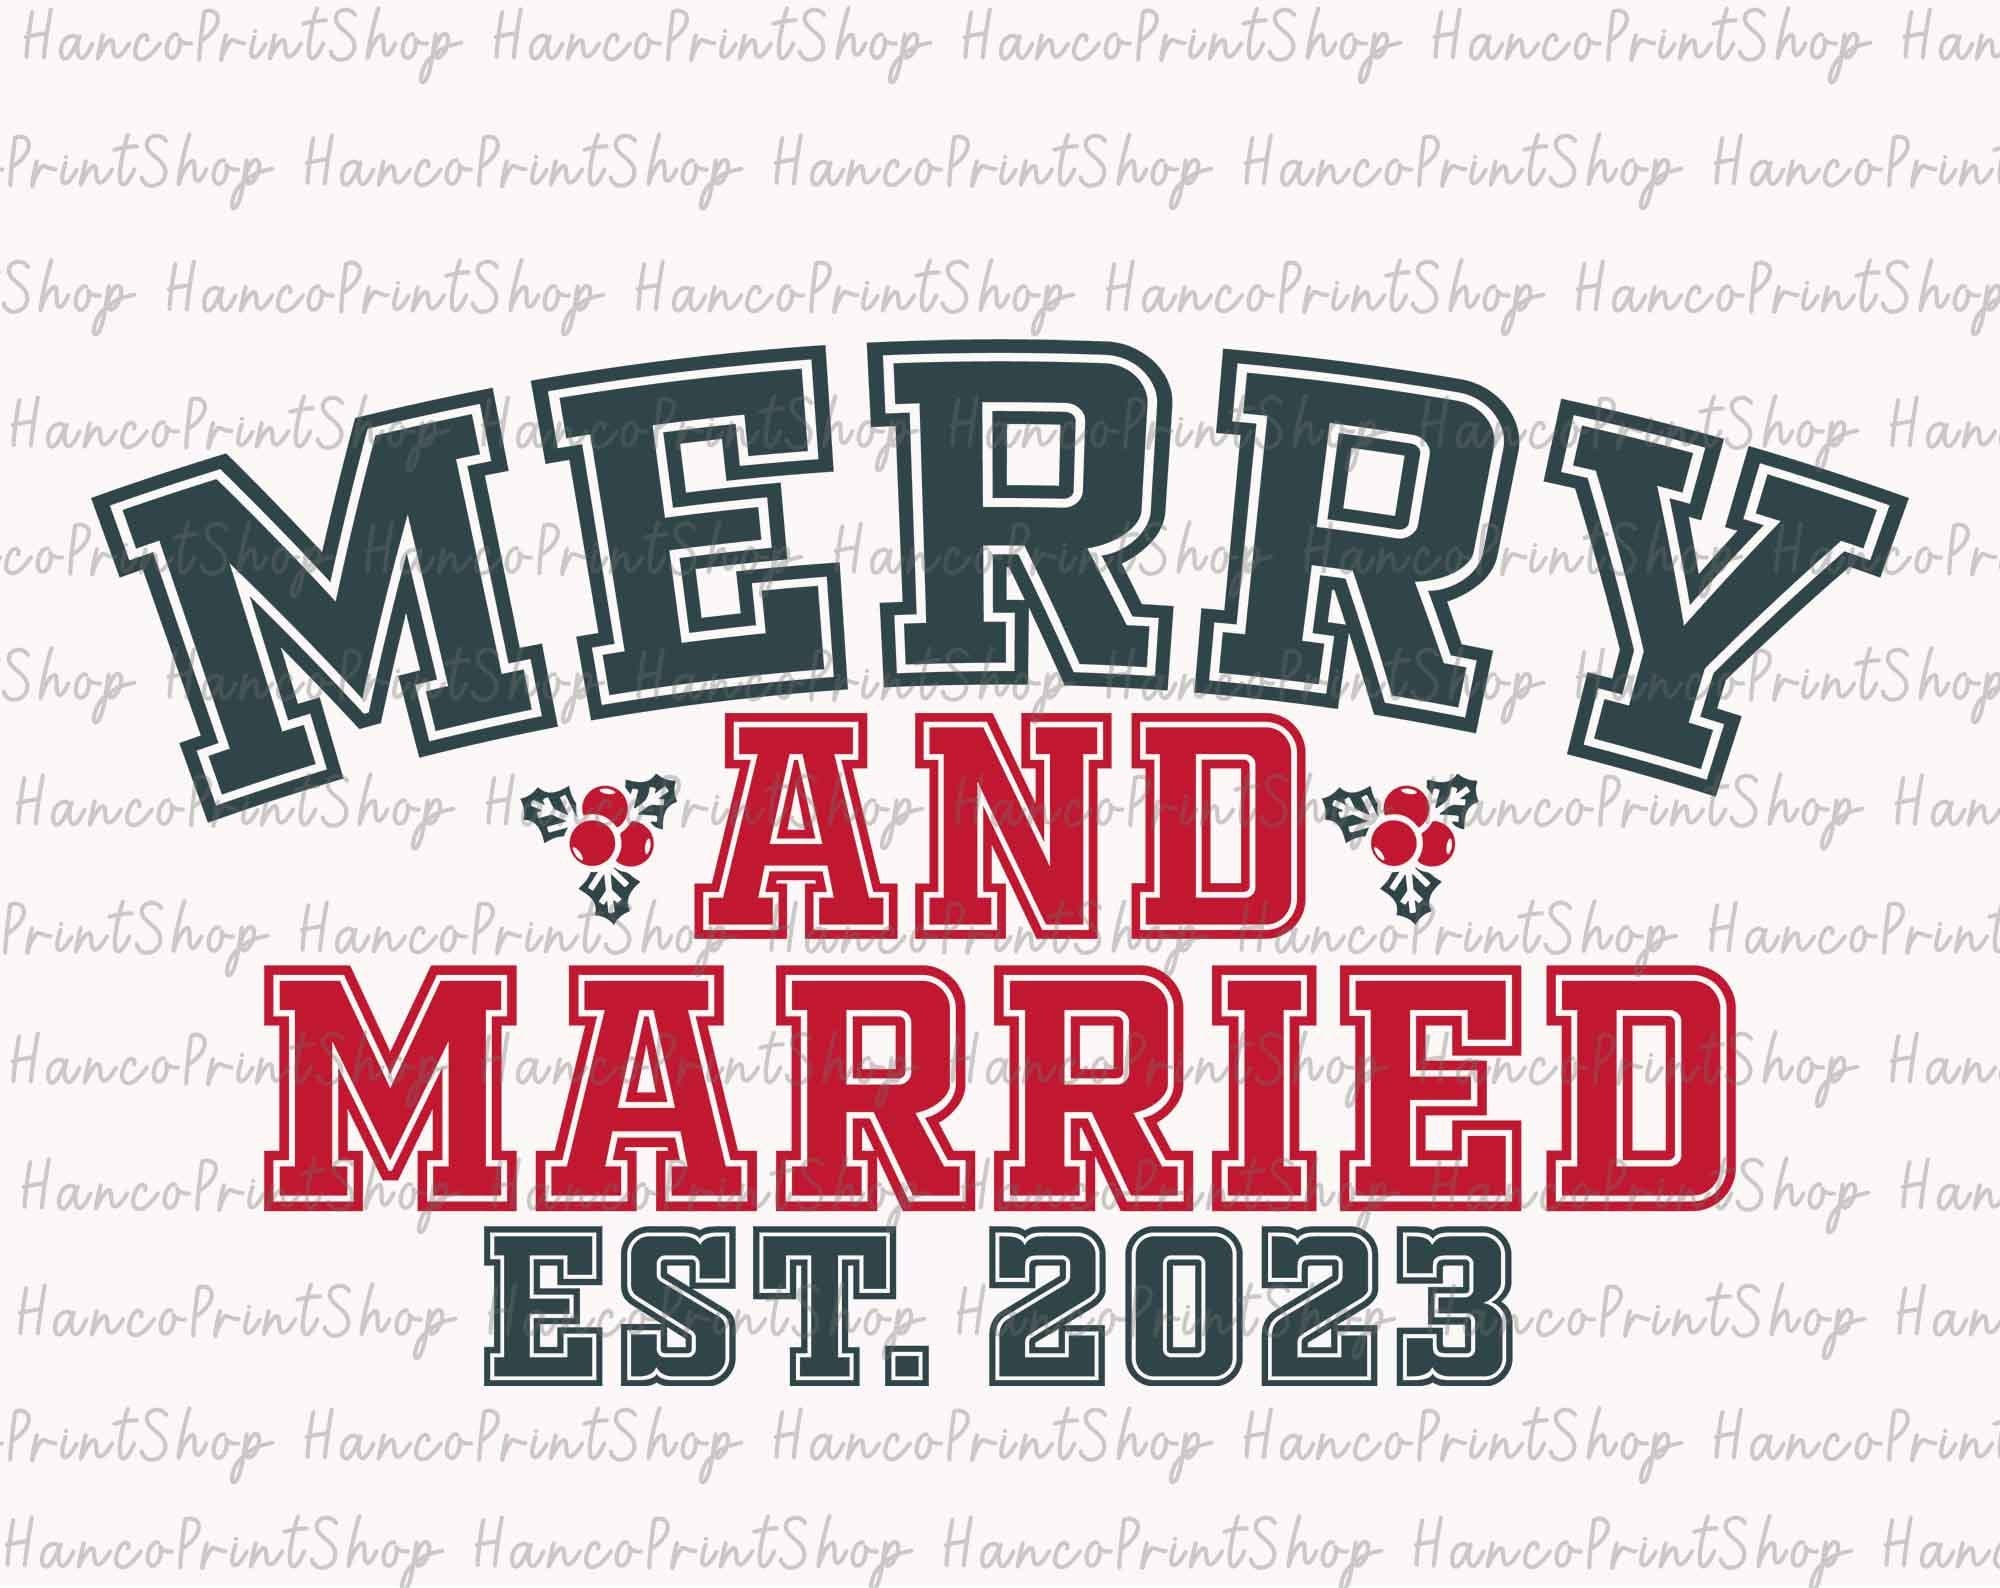 Merry and Married SVG, Christmas Married Svg, Christmas Wedding, Christmas Gift Svg, Cute Christmas Svg, Holiday Season, Digital Download